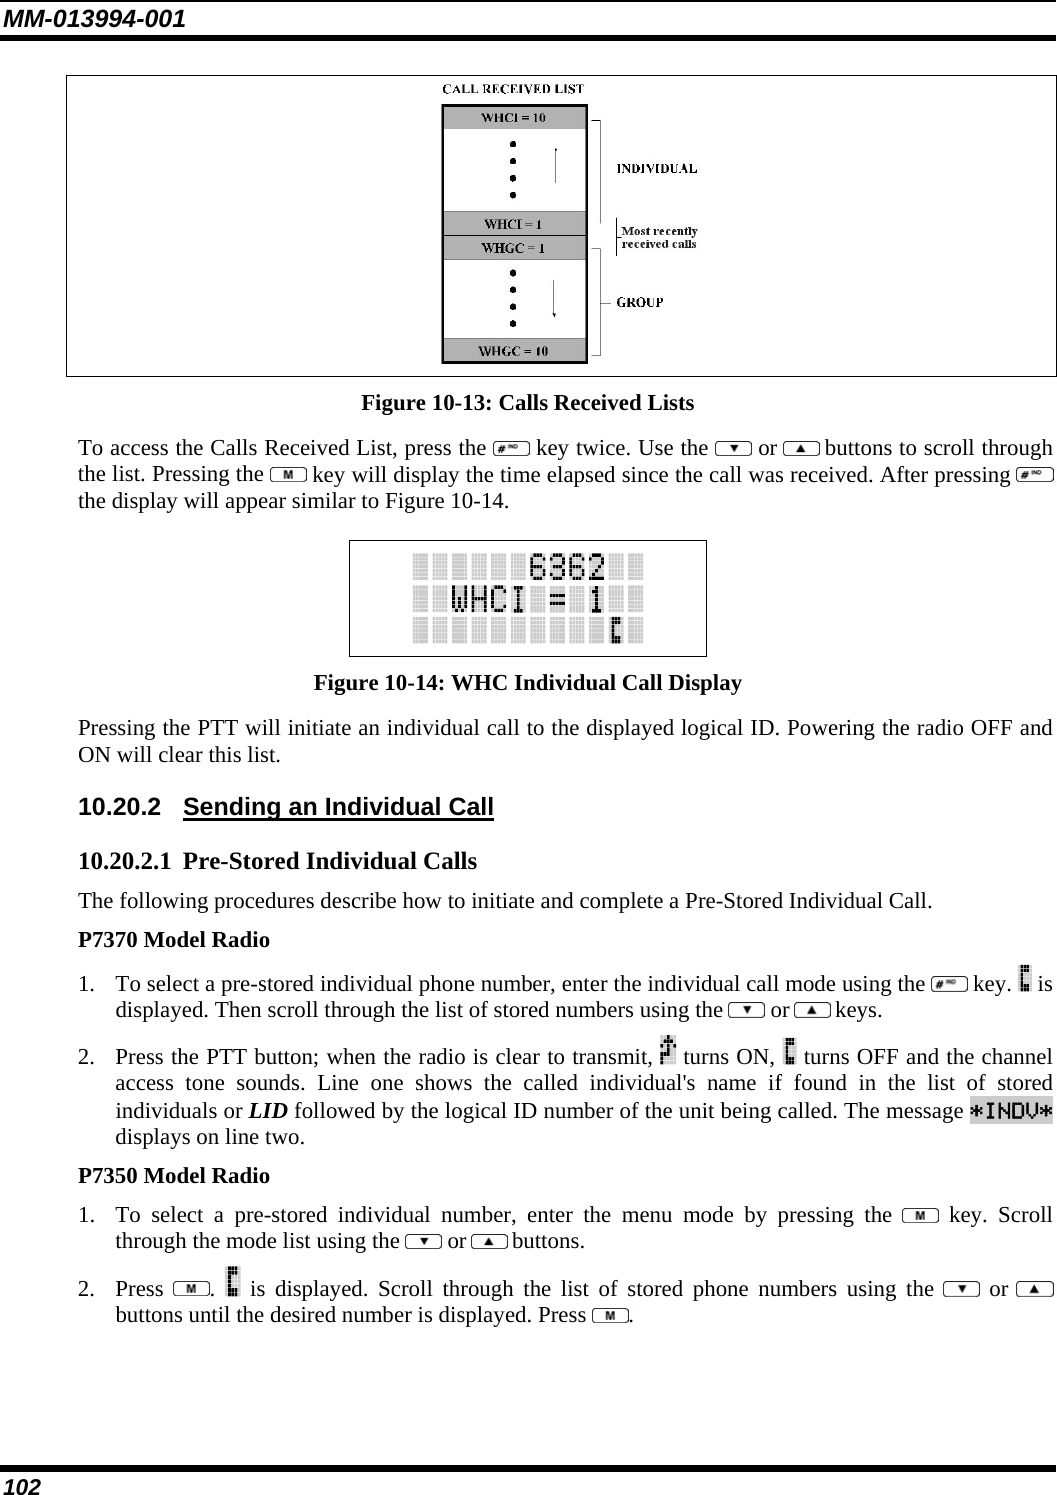 MM-013994-001 102  Figure 10-13: Calls Received Lists To access the Calls Received List, press the   key twice. Use the   or  buttons to scroll through the list. Pressing the   key will display the time elapsed since the call was received. After pressing   the display will appear similar to Figure 10-14.   Figure 10-14: WHC Individual Call Display Pressing the PTT will initiate an individual call to the displayed logical ID. Powering the radio OFF and ON will clear this list. 10.20.2  Sending an Individual Call 10.20.2.1 Pre-Stored Individual Calls The following procedures describe how to initiate and complete a Pre-Stored Individual Call. P7370 Model Radio 1. To select a pre-stored individual phone number, enter the individual call mode using the   key.   is displayed. Then scroll through the list of stored numbers using the   or  keys.  2. Press the PTT button; when the radio is clear to transmit,   turns ON,   turns OFF and the channel access tone sounds. Line one shows the called individual&apos;s name if found in the list of stored individuals or LID followed by the logical ID number of the unit being called. The message *INDV* displays on line two. P7350 Model Radio 1. To select a pre-stored individual number, enter the menu mode by pressing the   key. Scroll through the mode list using the   or  buttons.  2. Press  .   is displayed. Scroll through the list of stored phone numbers using the   or  buttons until the desired number is displayed. Press  . 